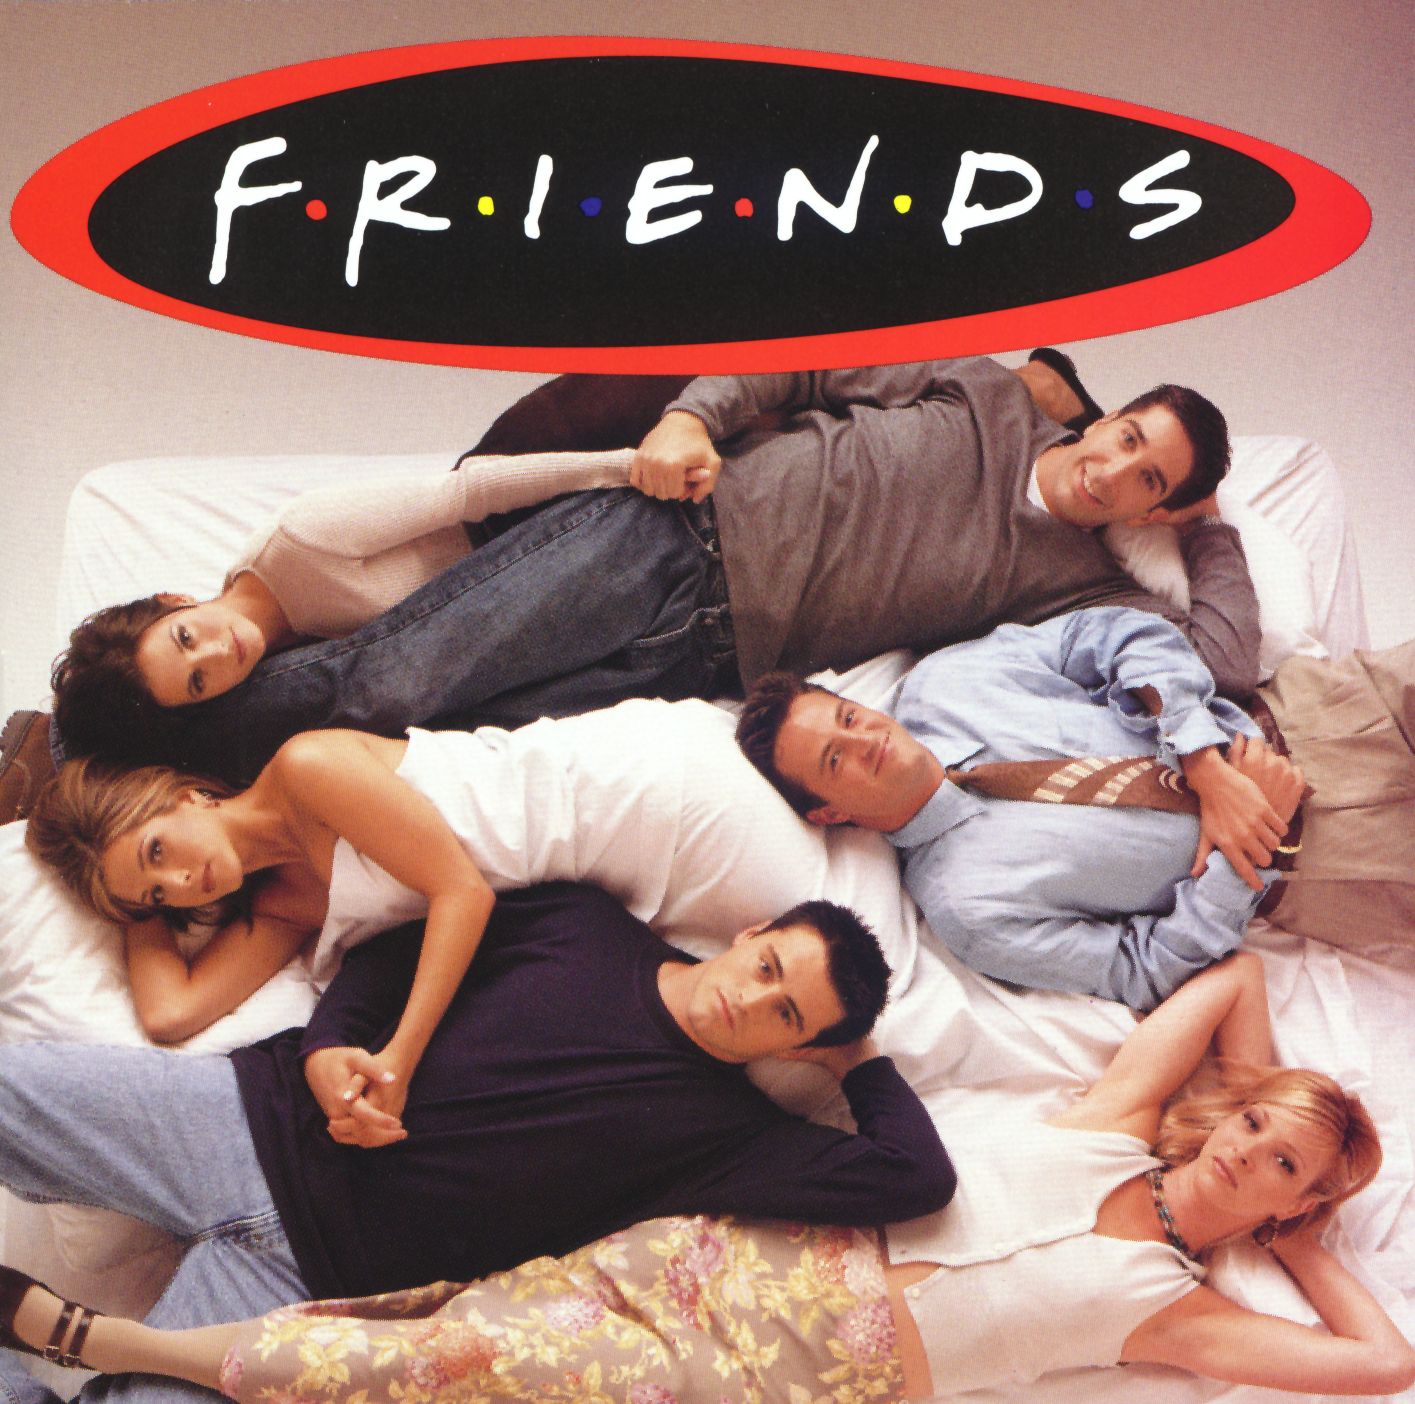 I'll Be There For You [Long Version]